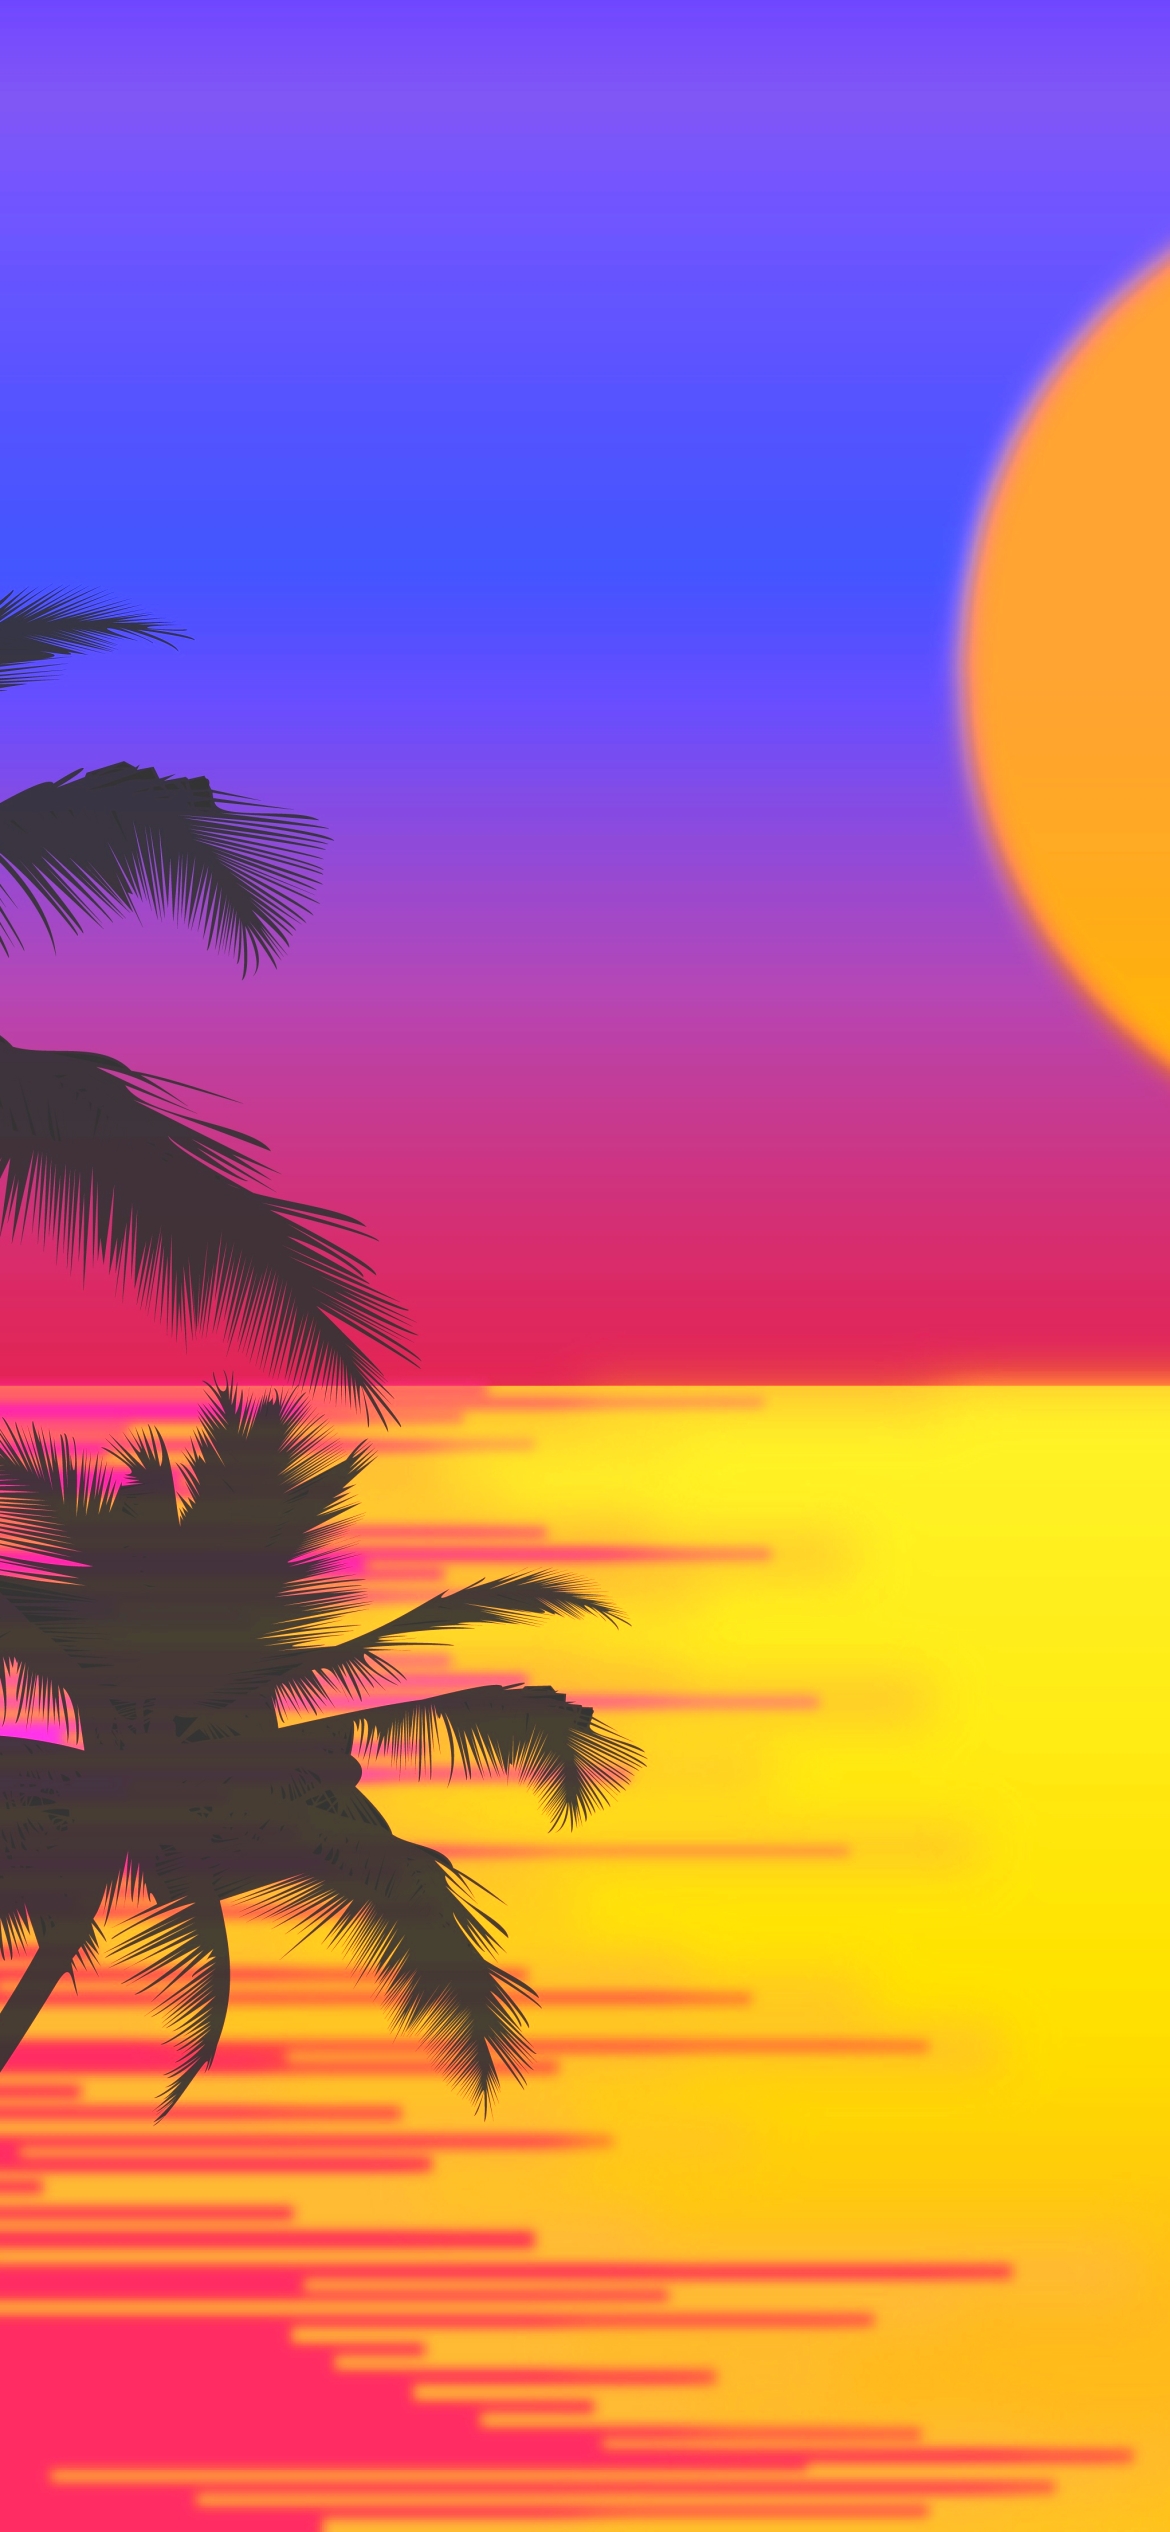 Retro Sunset Reflection on Water by Top_Notch_Vectors